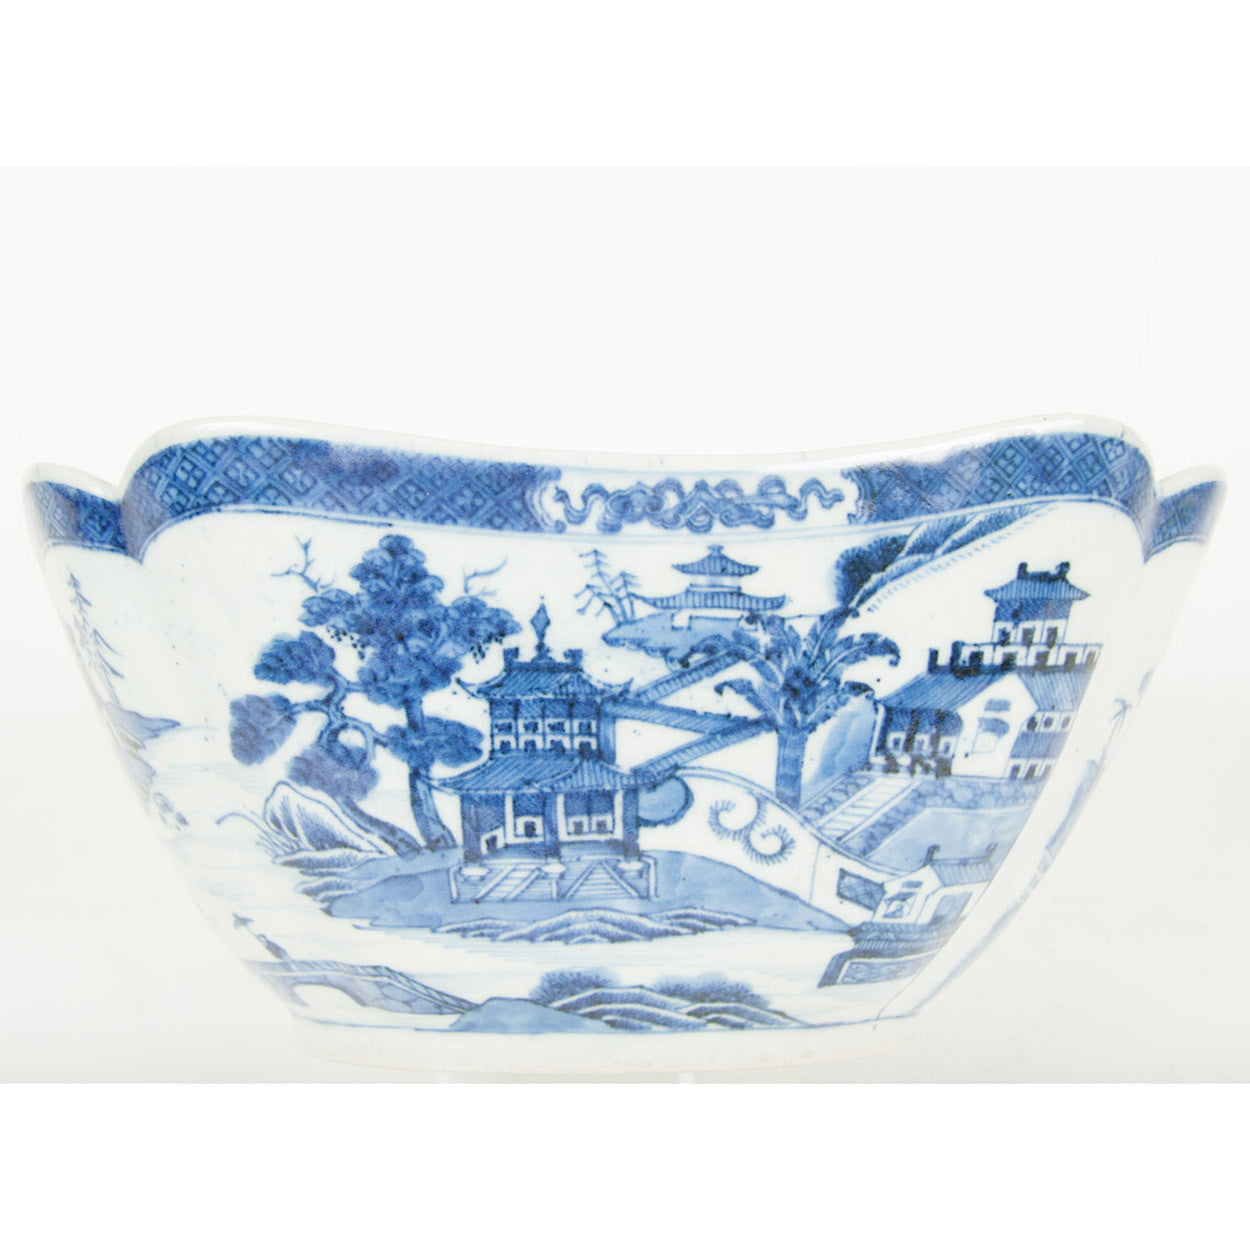 A Chinese Export Blue and White Nanking Porcelain Square Bowl